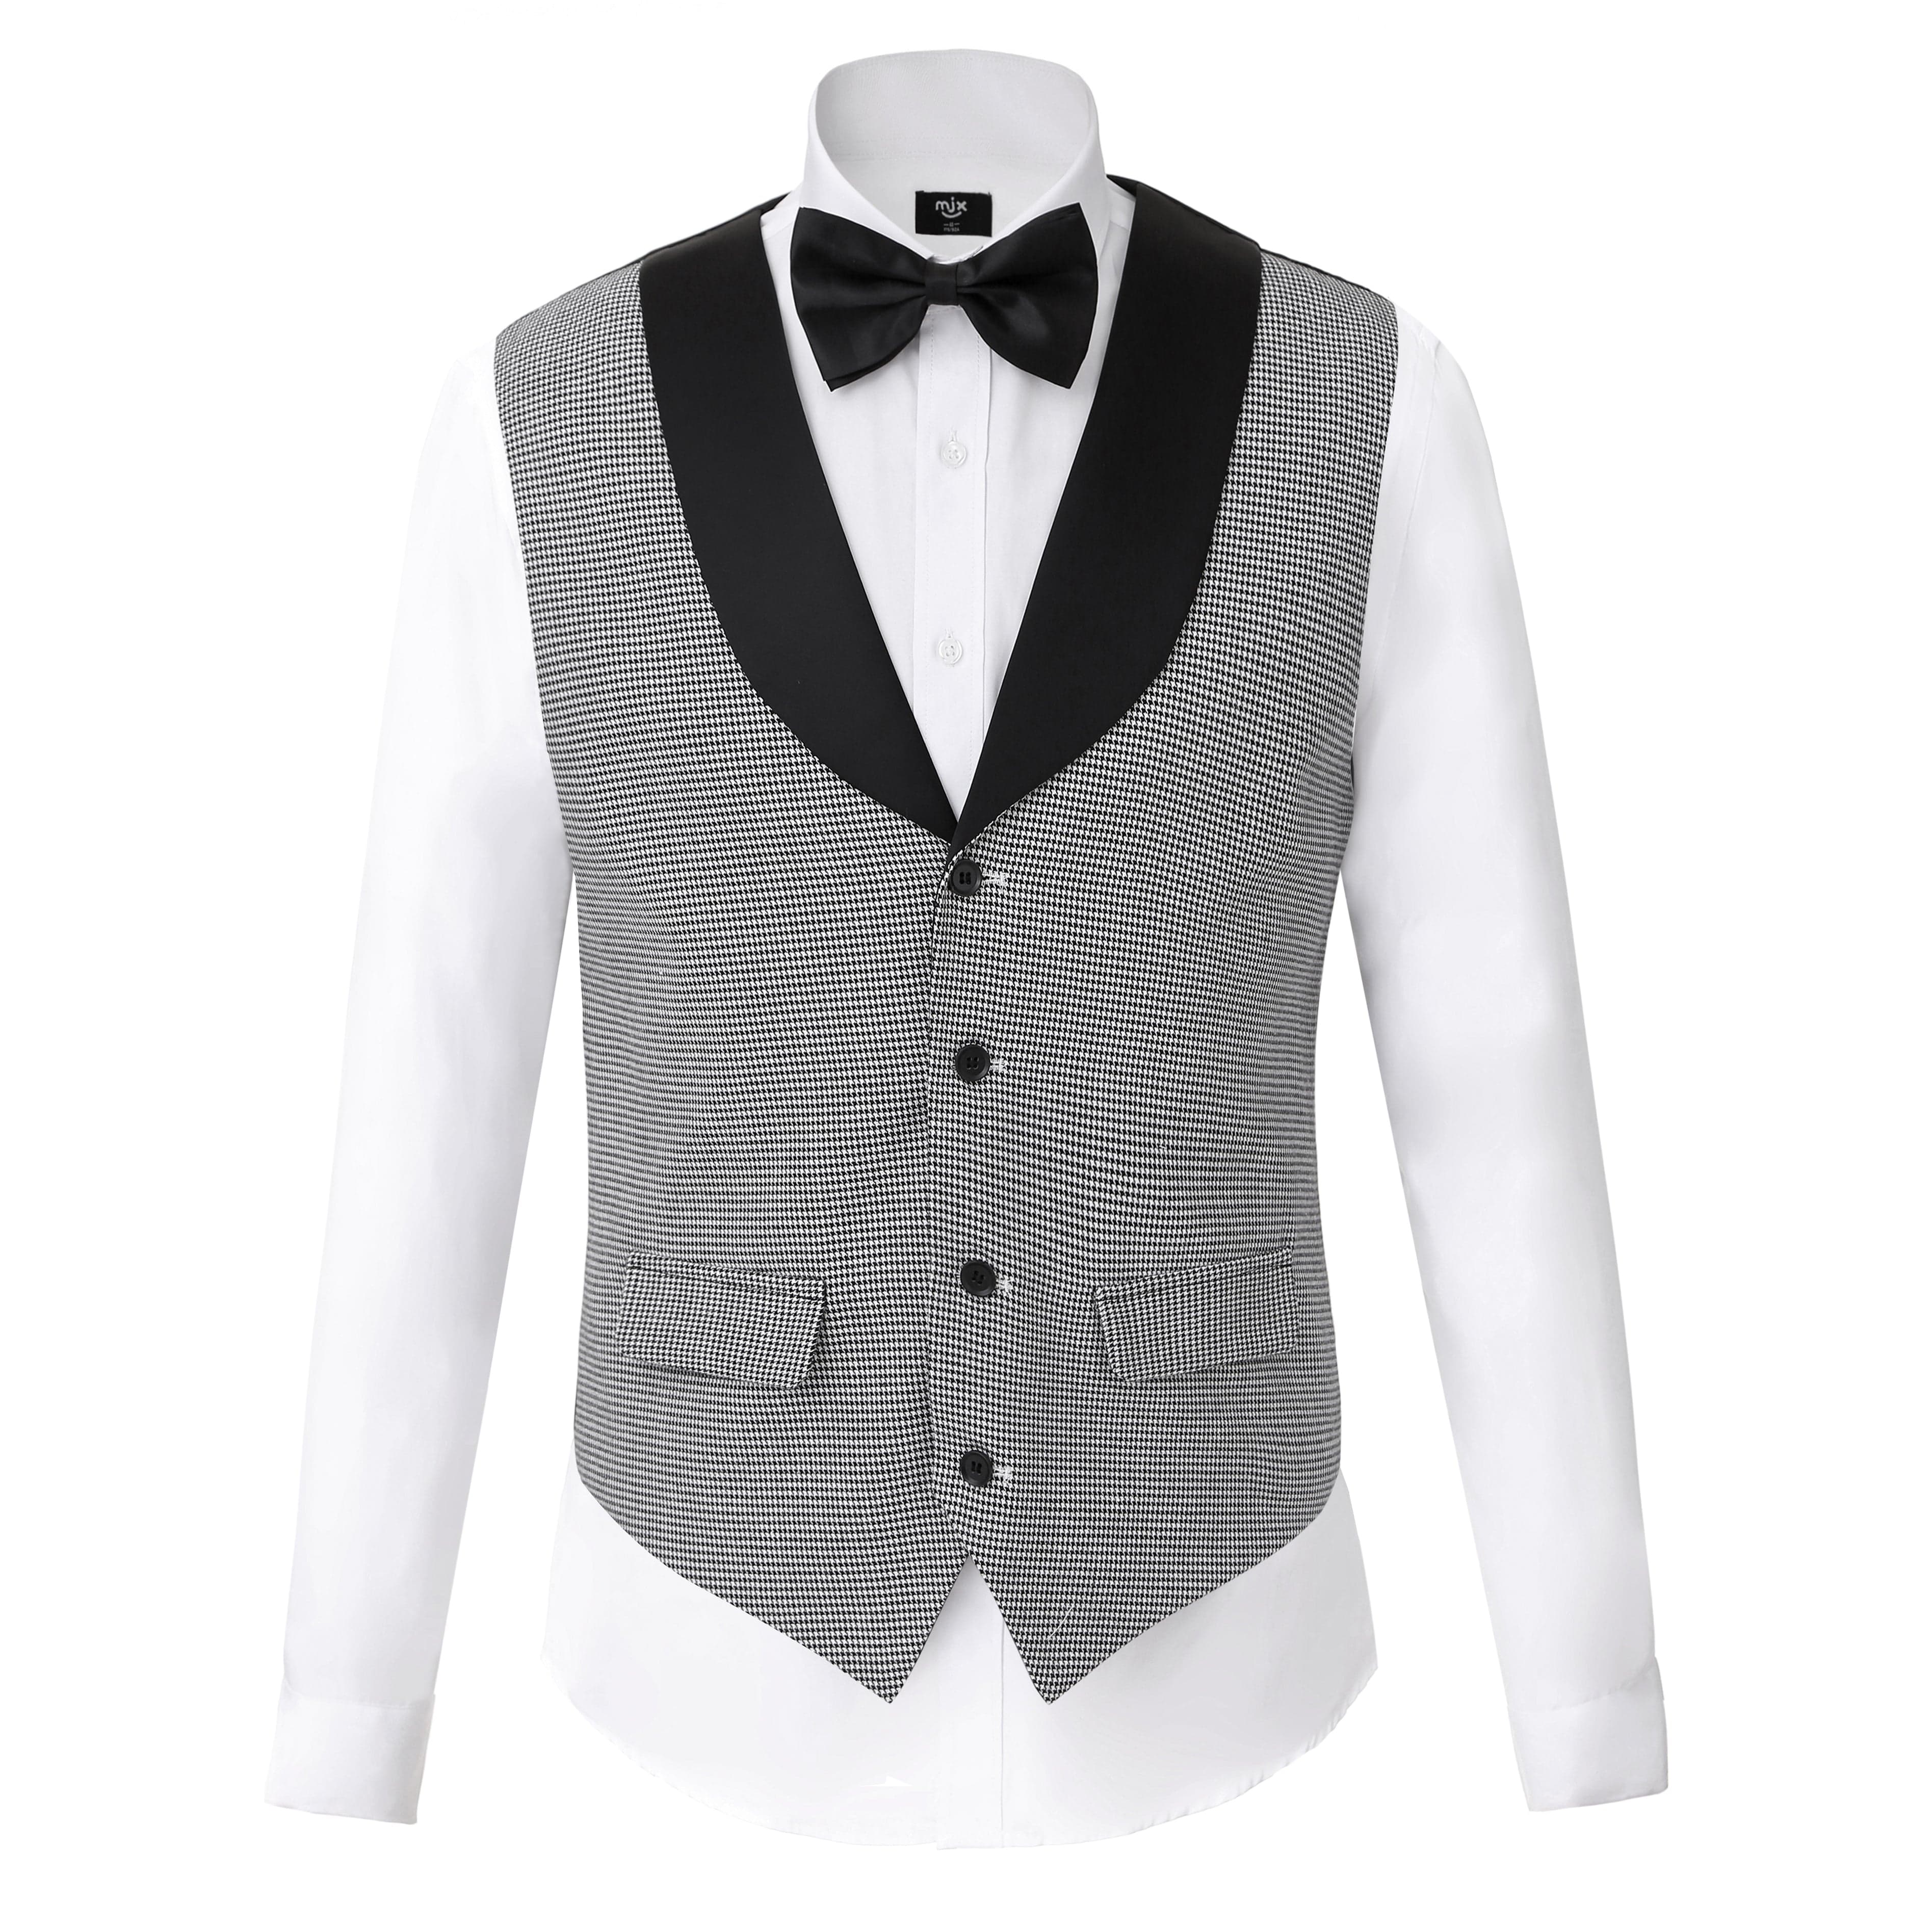 ceehuteey Men's Houndstooth Formal Shawl Lapel For Wedding Party Waistcoat